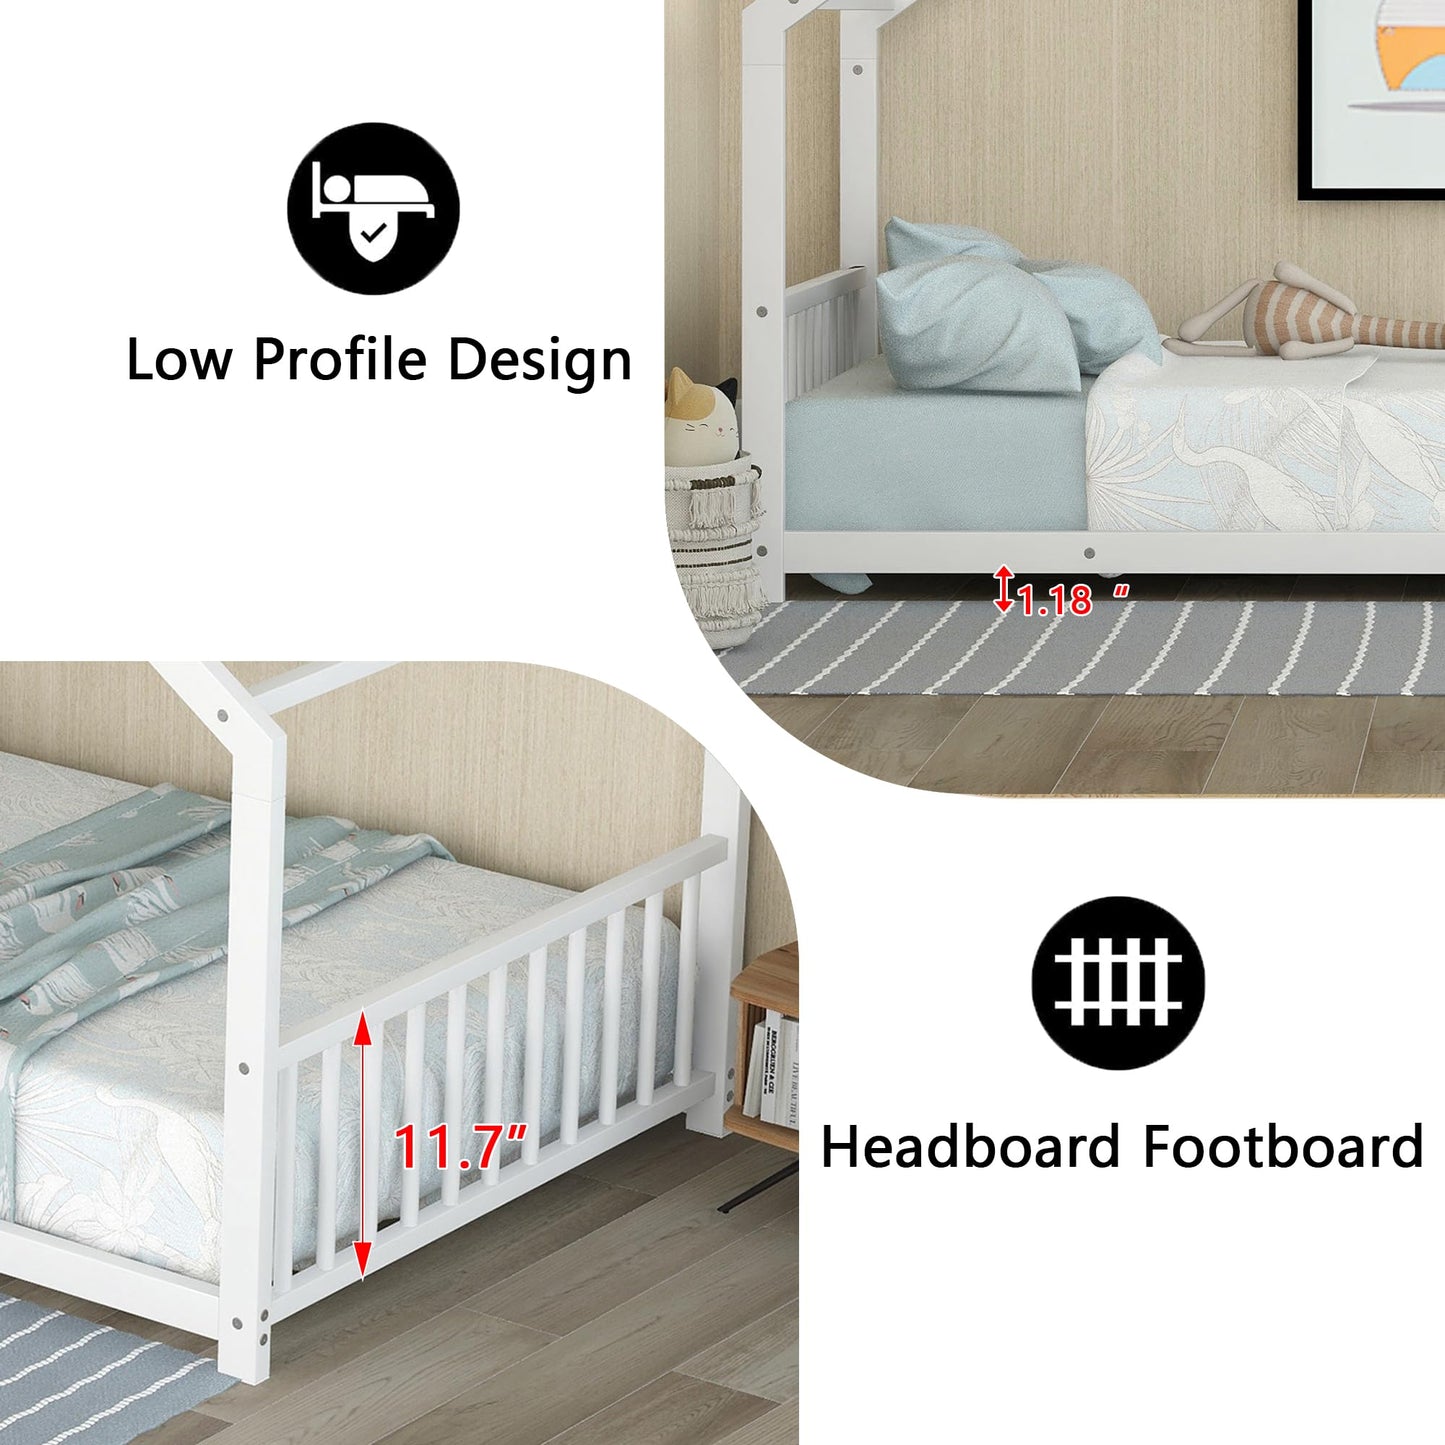 Montessori Floor Bed with Headboard and Footboard, Twin Floor Bed with Slats, Metal House Floor Bed for Kids, Girls, Boys, White Montessori Bed Twin Size